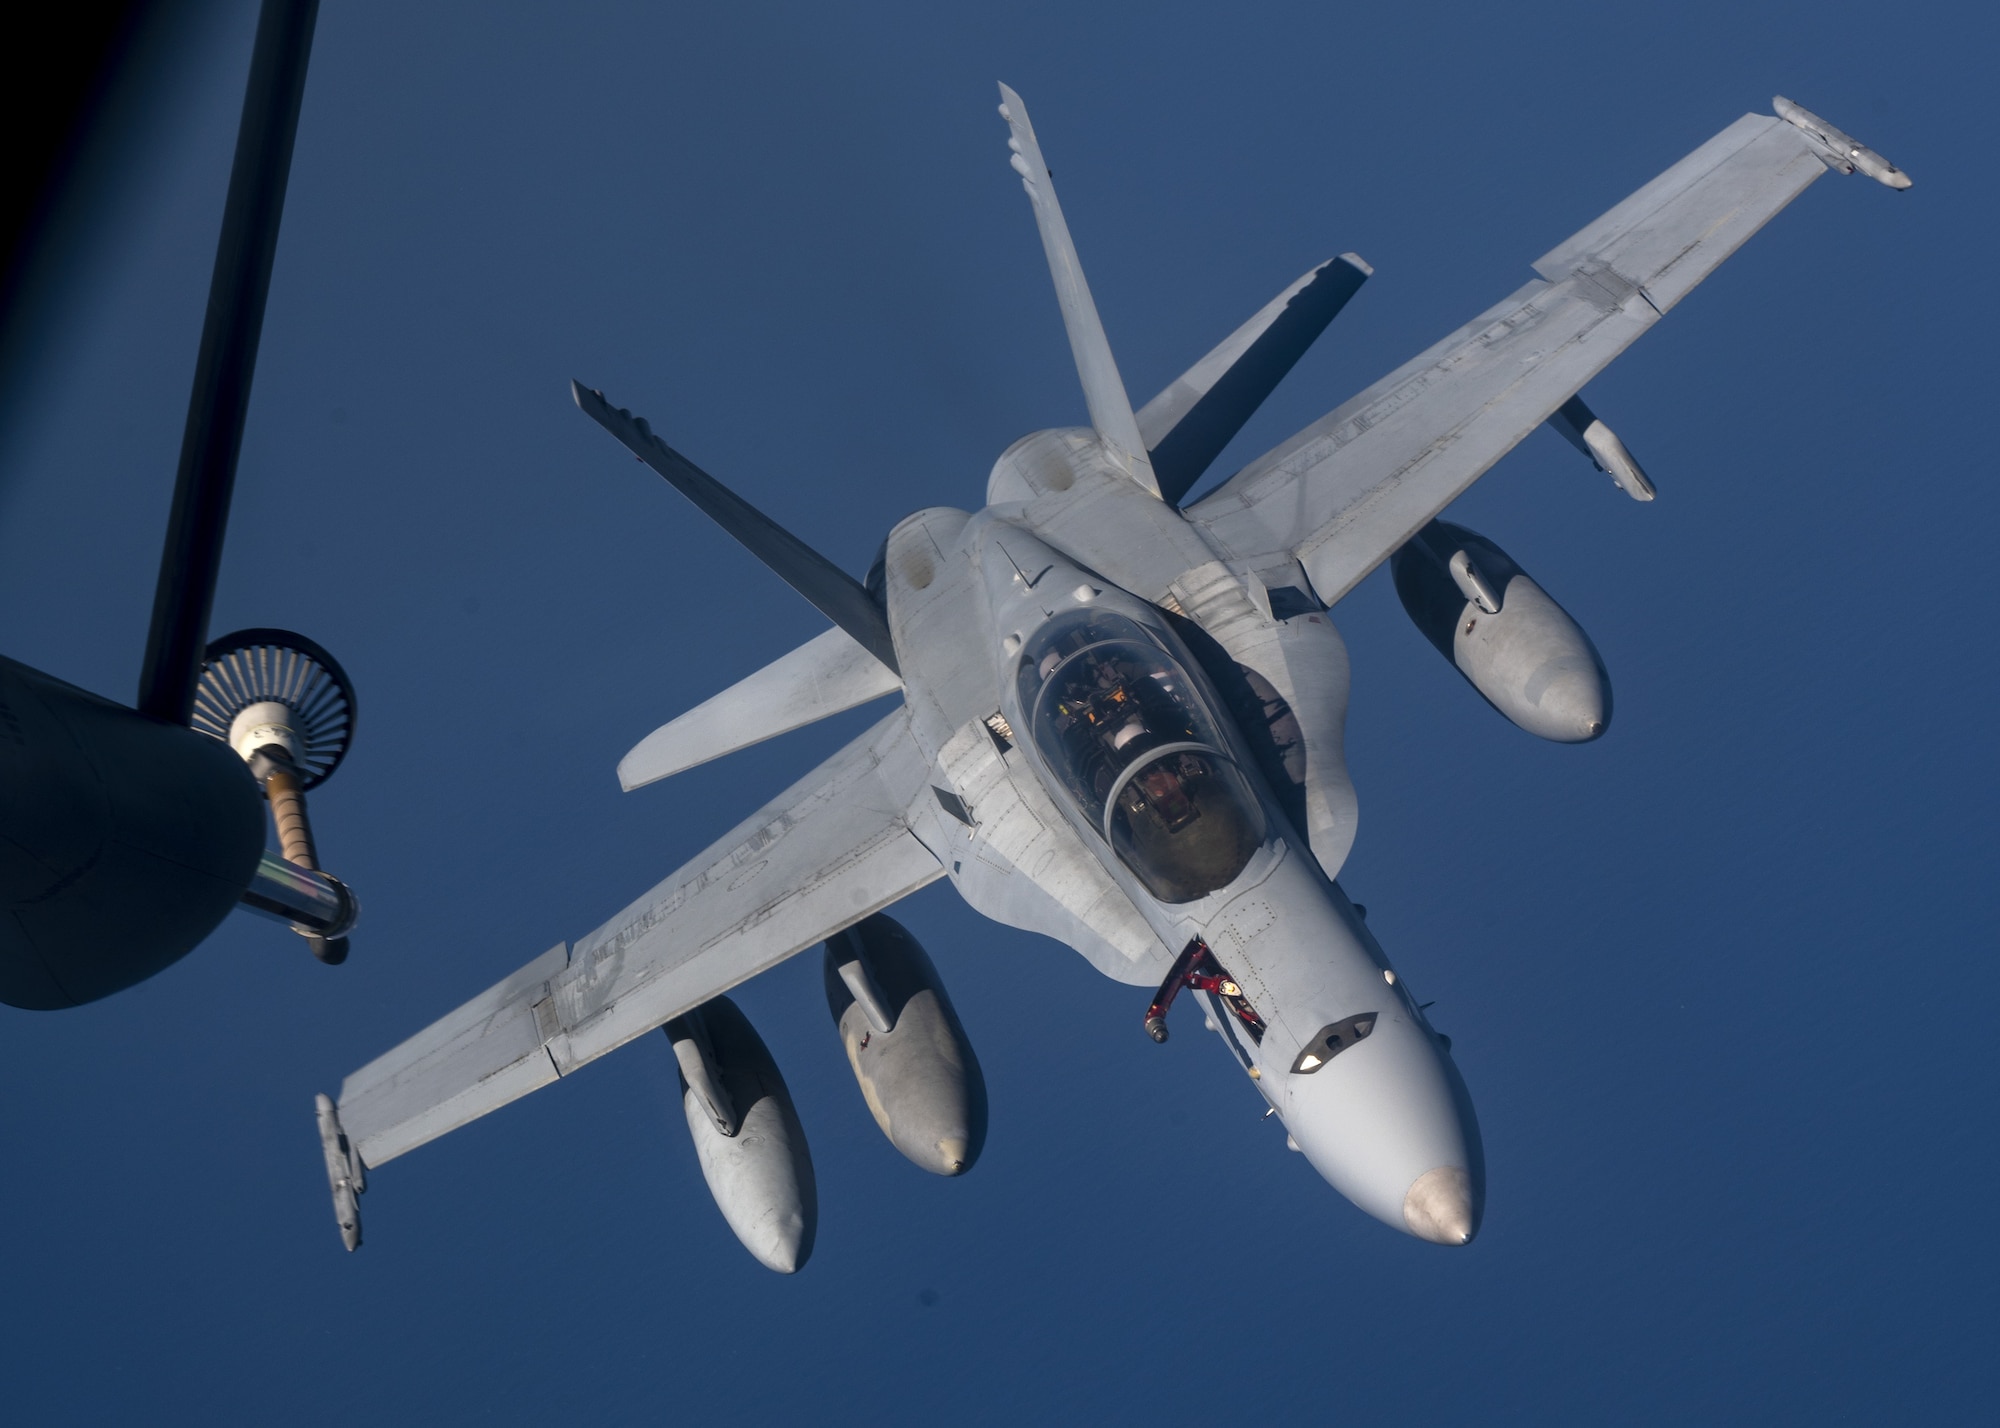 A U.S. Marine Corps F/A-18C Hornet prepares to be refueled by a U.S. Air Force KC-135 Stratotanker from Fairchild Air Force Base over the Pacific, March 9, 2023. Aircrew from the 384th Air Refueling Squadron conducted an air refueling coronet with Marines from the Marine Fighter Attack Squadron 312, demonstrating the critical role mobility forces have in projecting the joint force anywhere, anytime. (U.S. Air Force photo by Staff Sgt. Lawrence Sena)